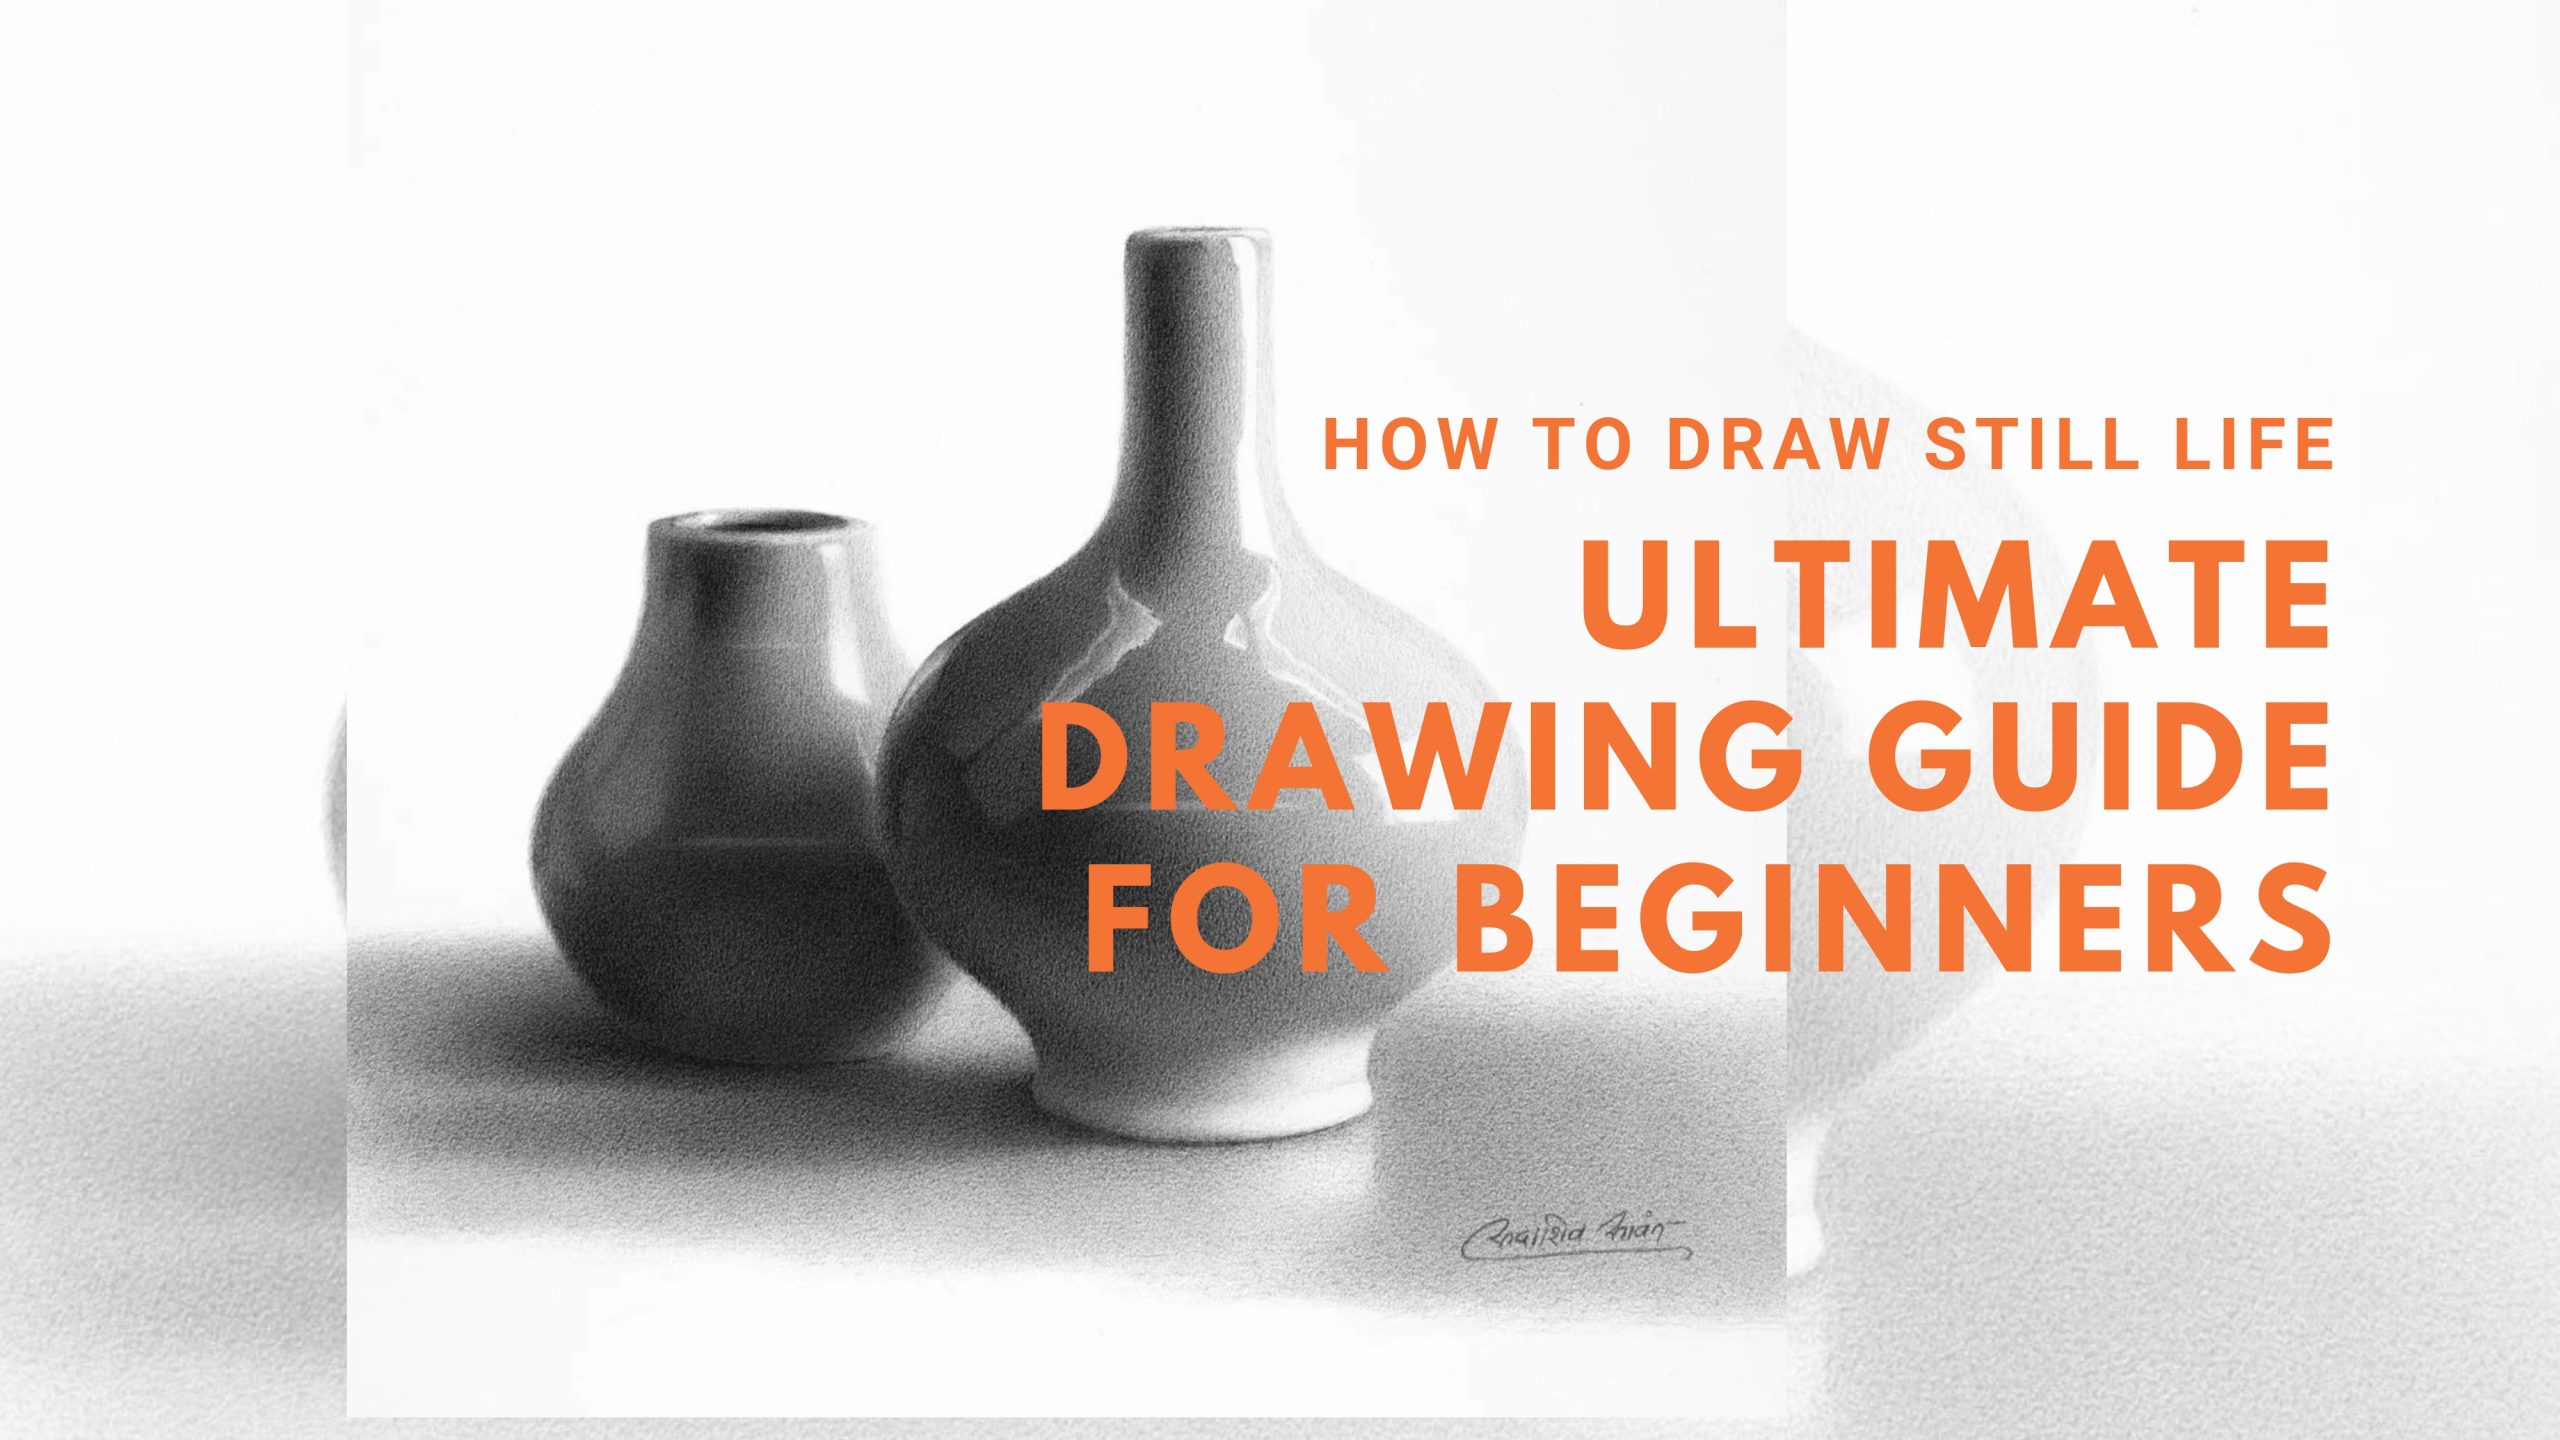 https://www.pencilperceptions.com/wp-content/uploads/2023/02/How-To-Draw-Still-Life-scaled.jpg